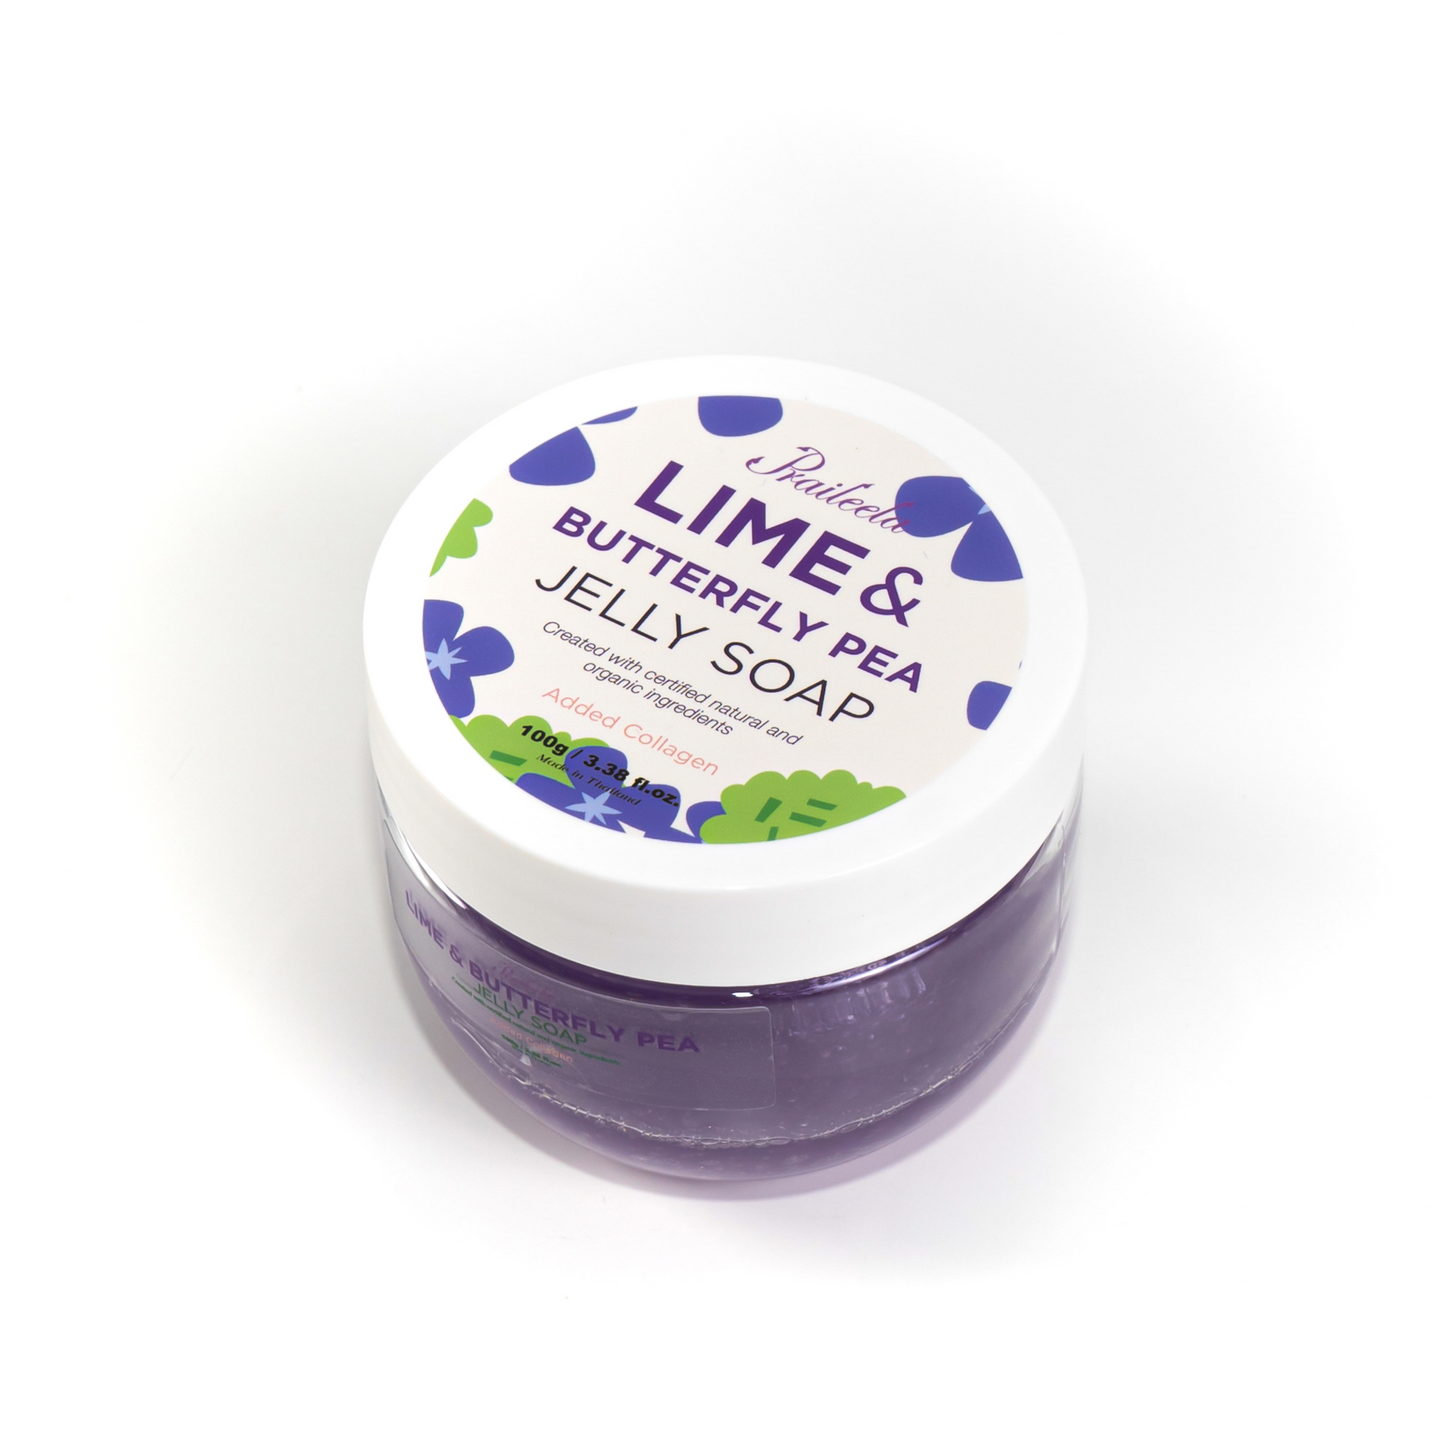 Lime Butterfly Pea Jelly Soap